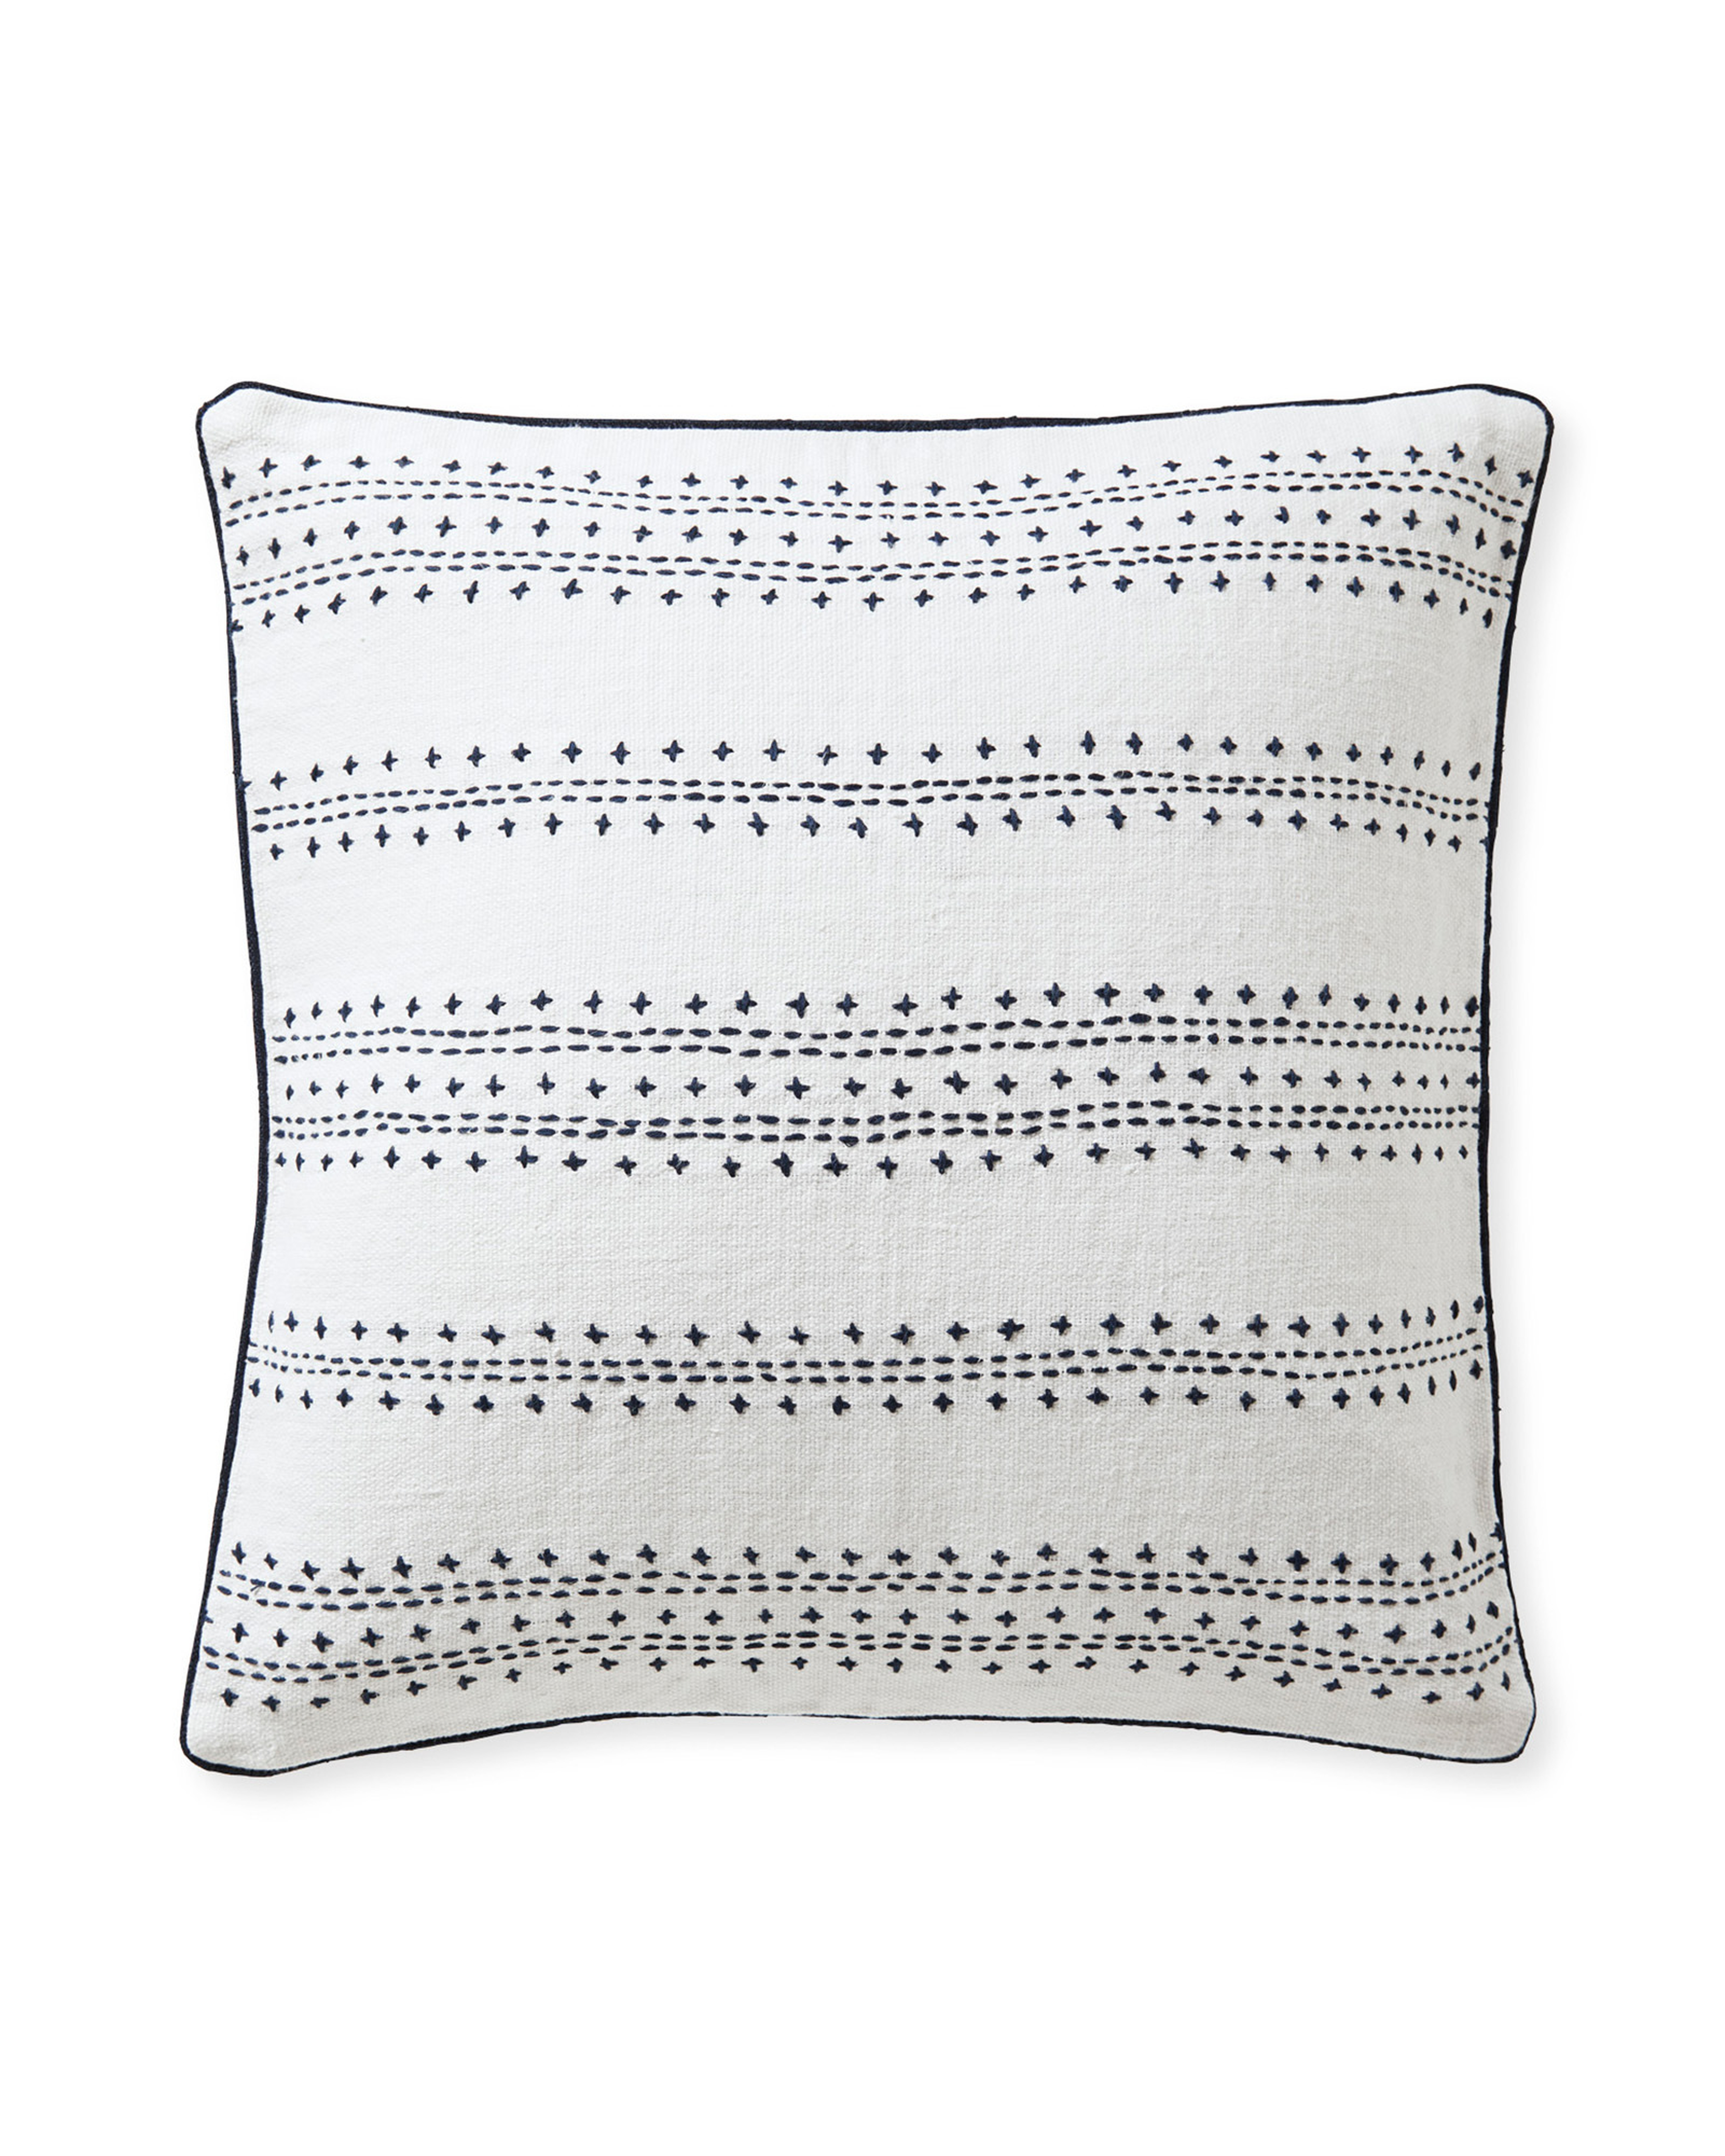 Catania Pillow Cover - Serena and Lily